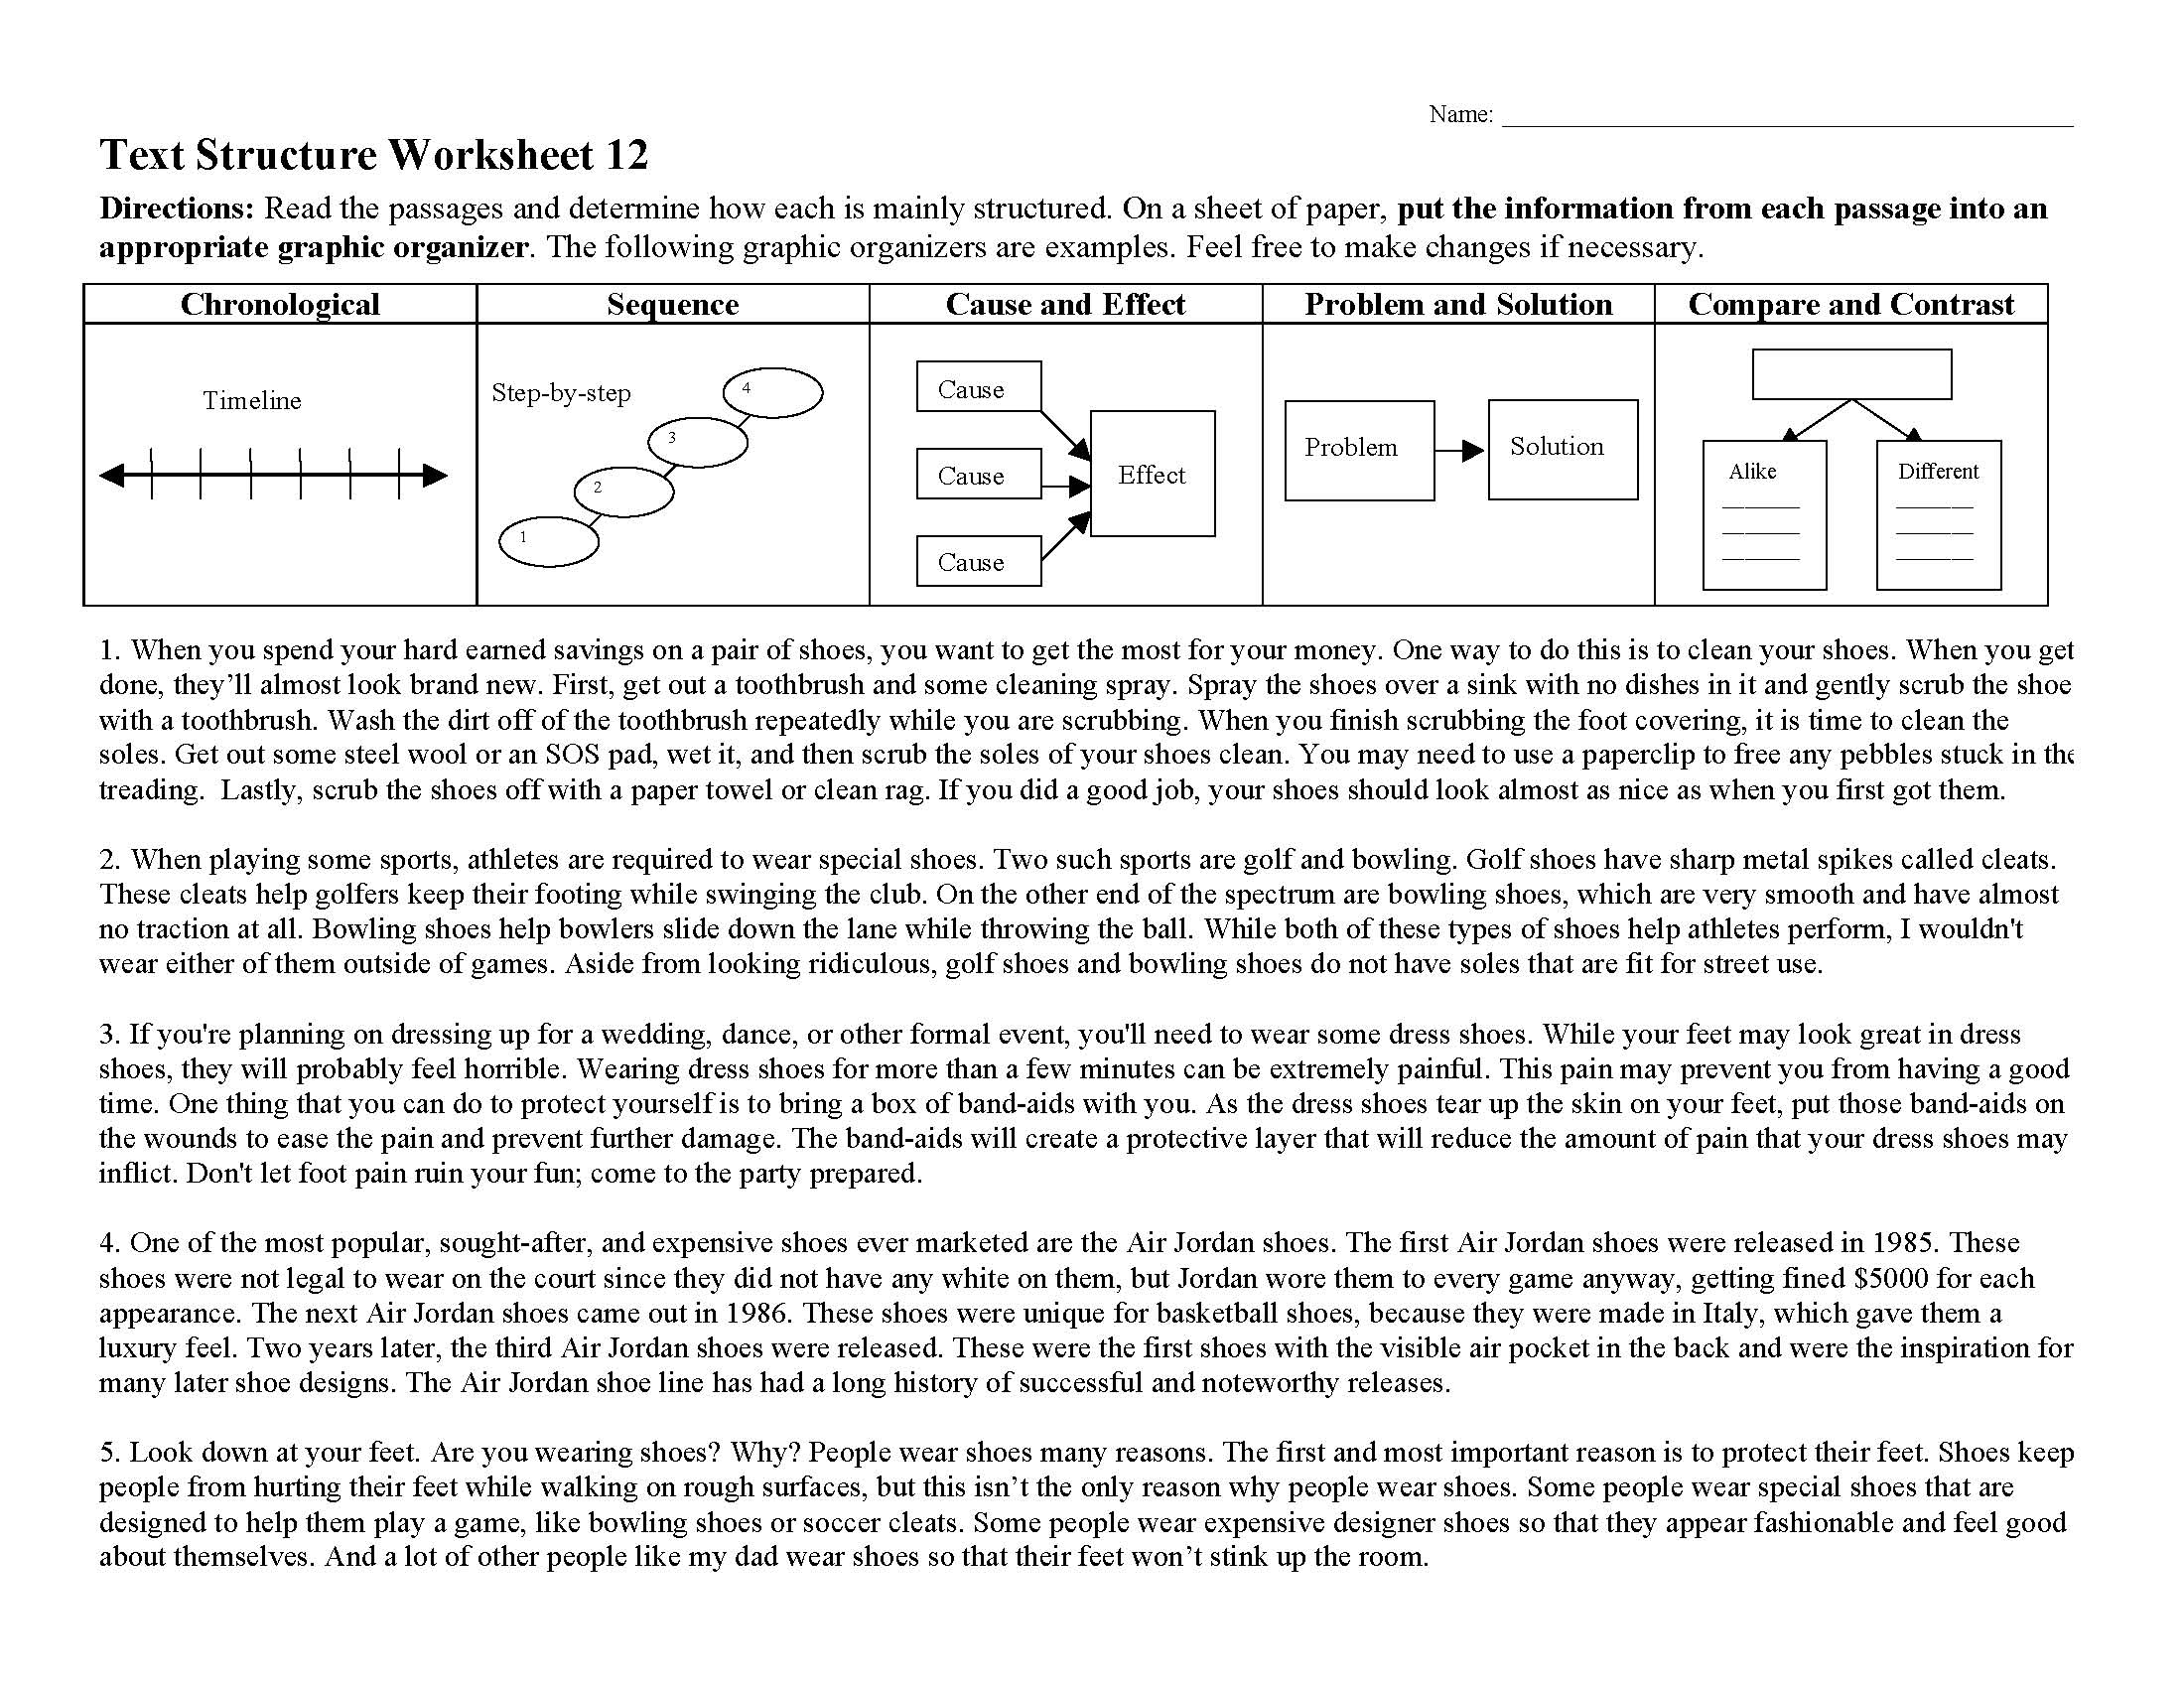 This is a preview image of Text Structure Worksheet 12. Click on it to enlarge it or view the source file.